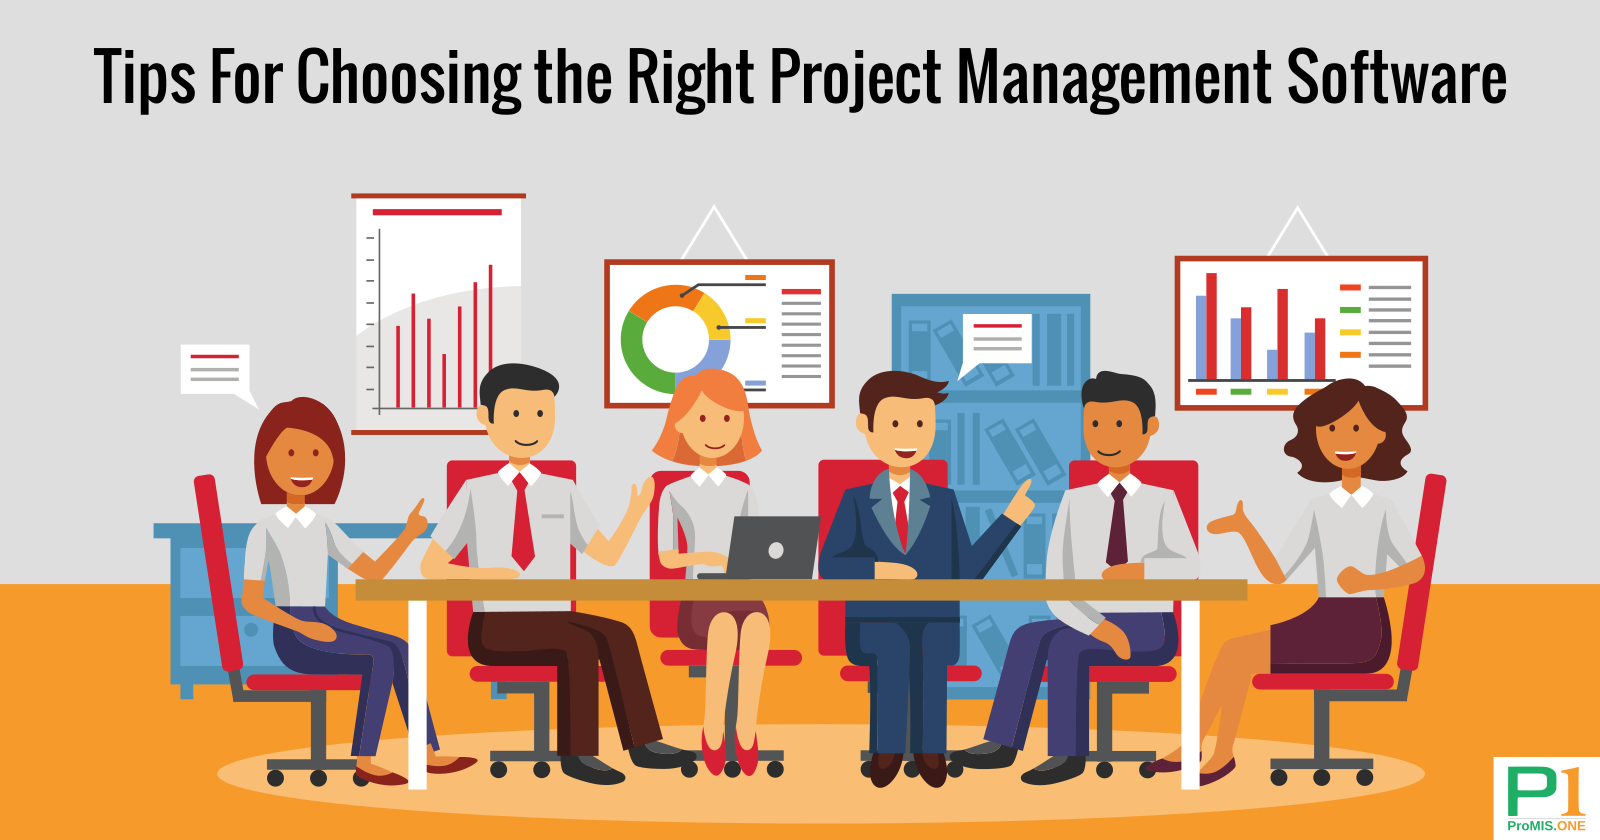 Tips For Choosing the Right Project Management Software